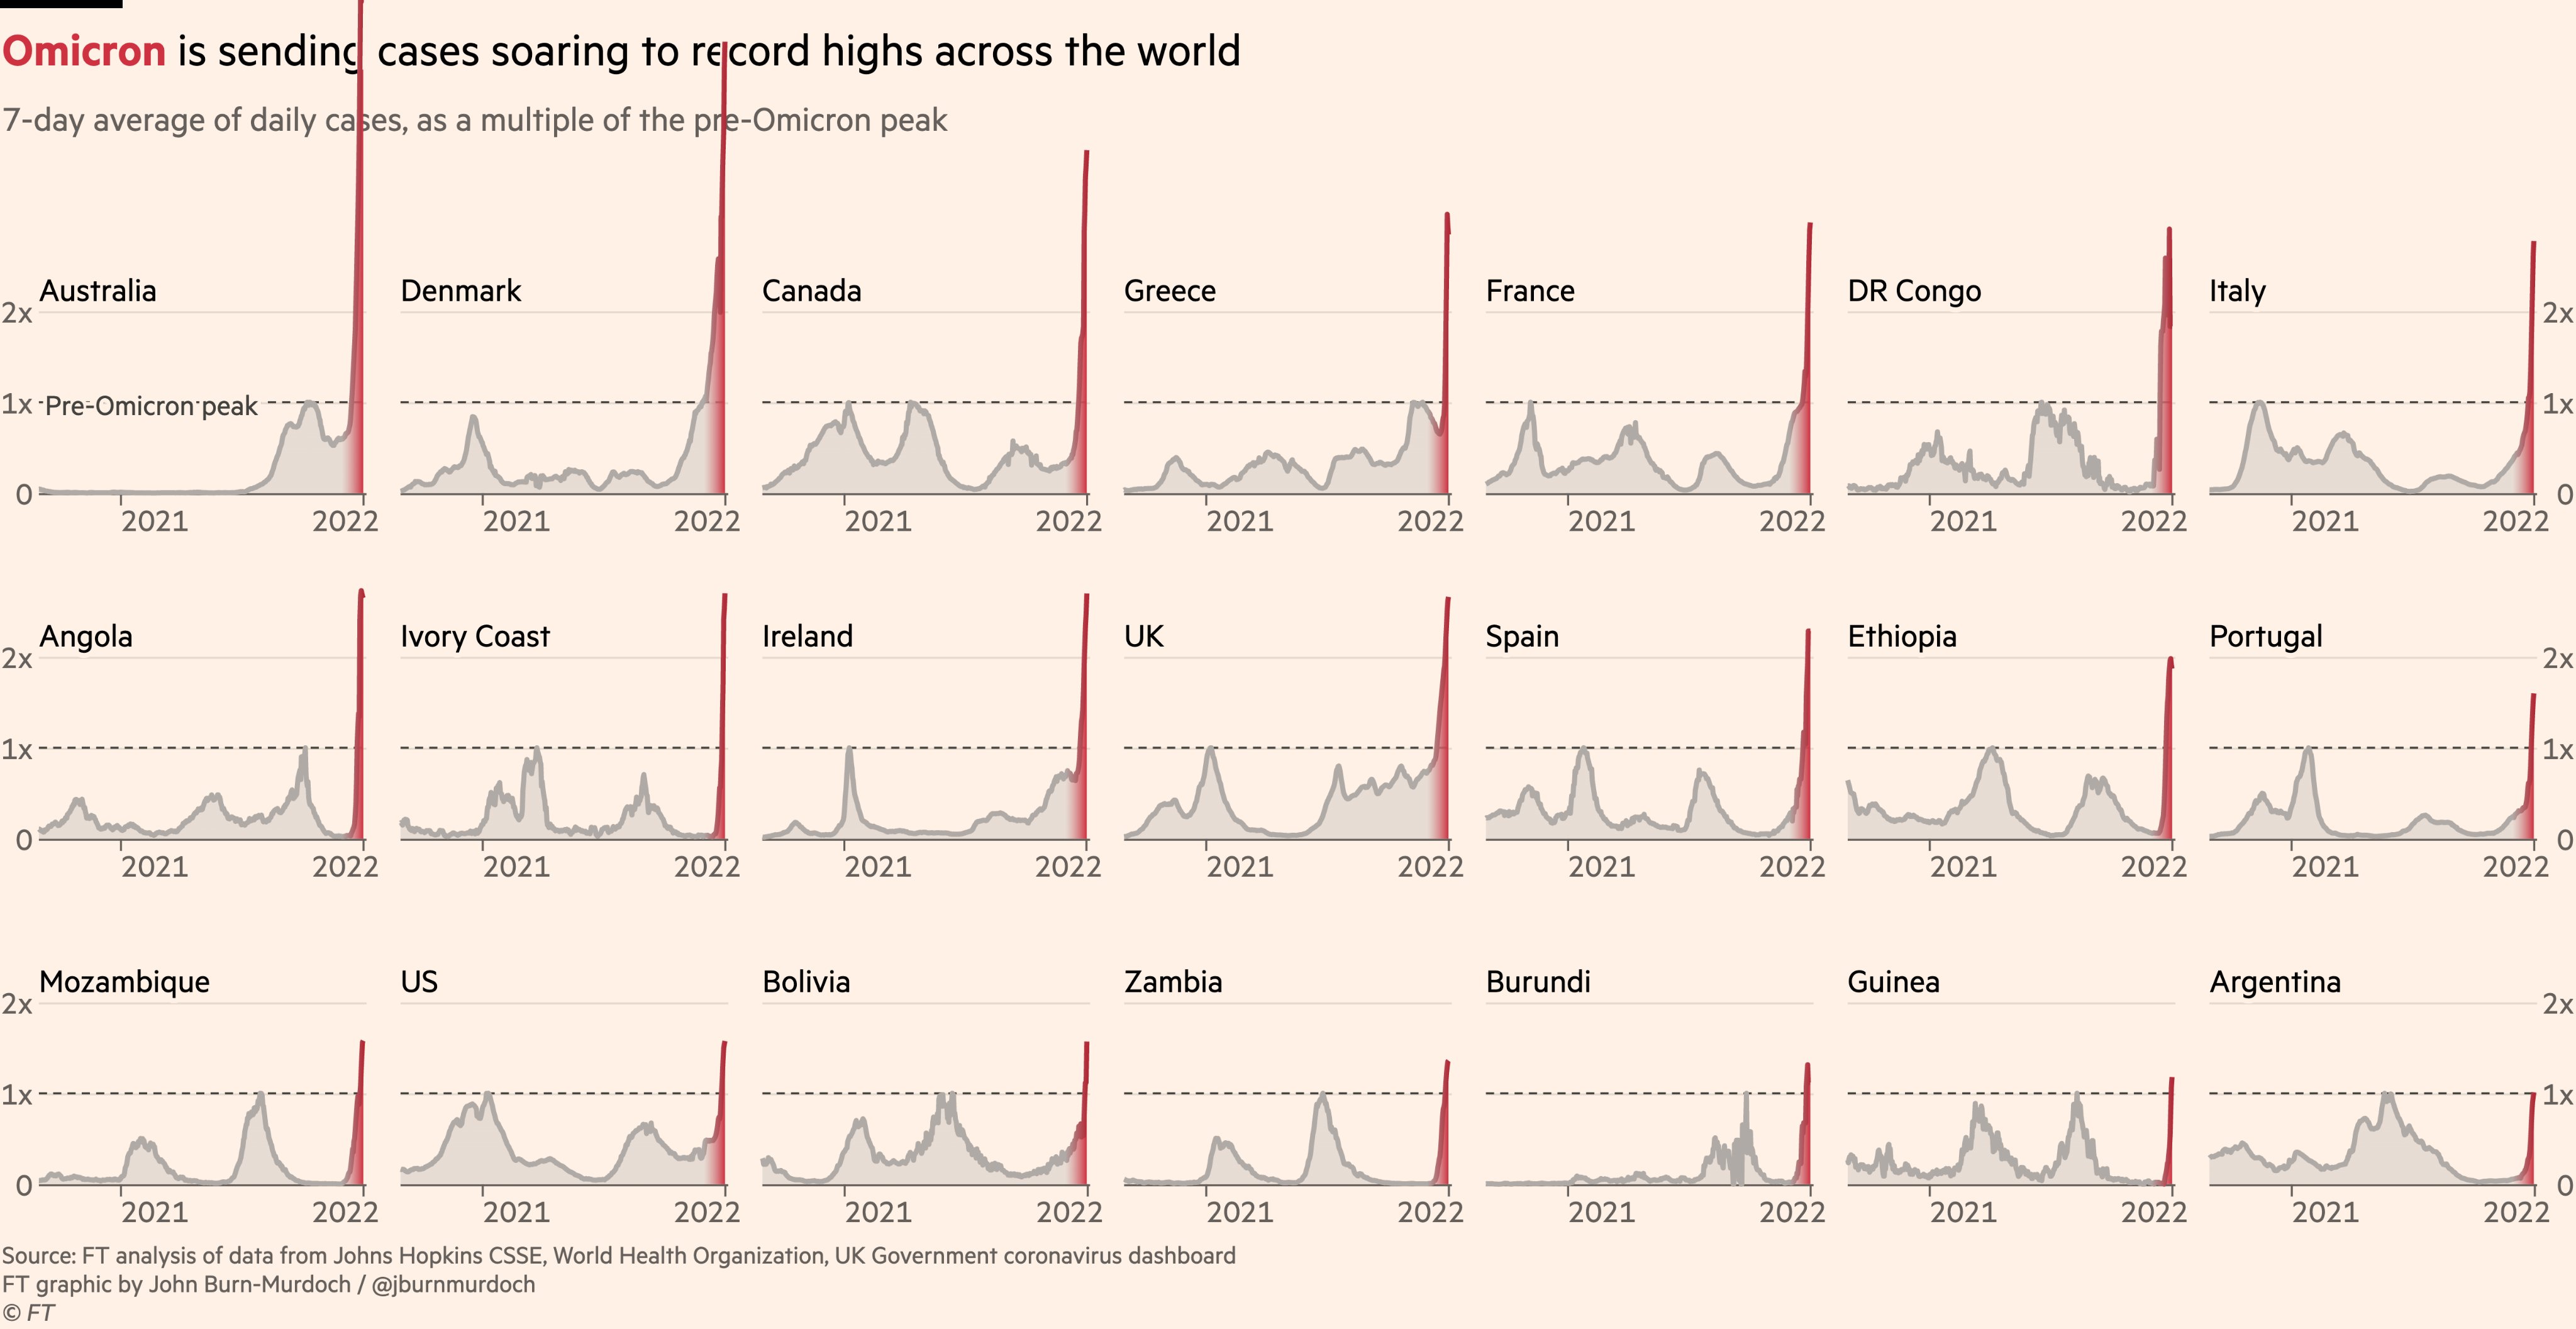 A series of area charts titled 'Omicron is sending cases soaring to record highs across the world'. The highest values on the charts, for Australia and Denmark, spill over over the title and even of the edge of the image